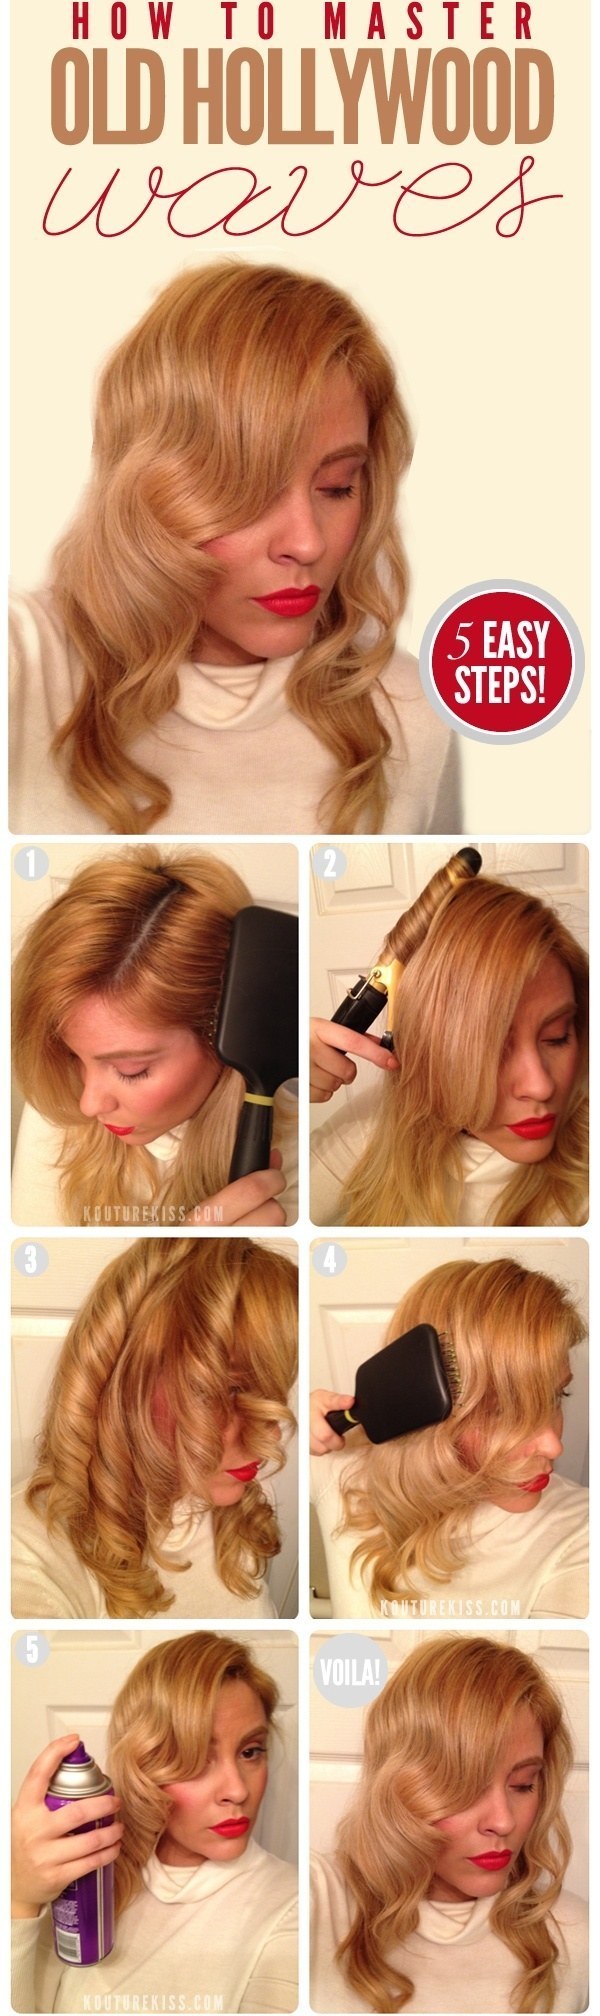 32 Vintage Hairstyle Tutorials You Should Not Miss Styles